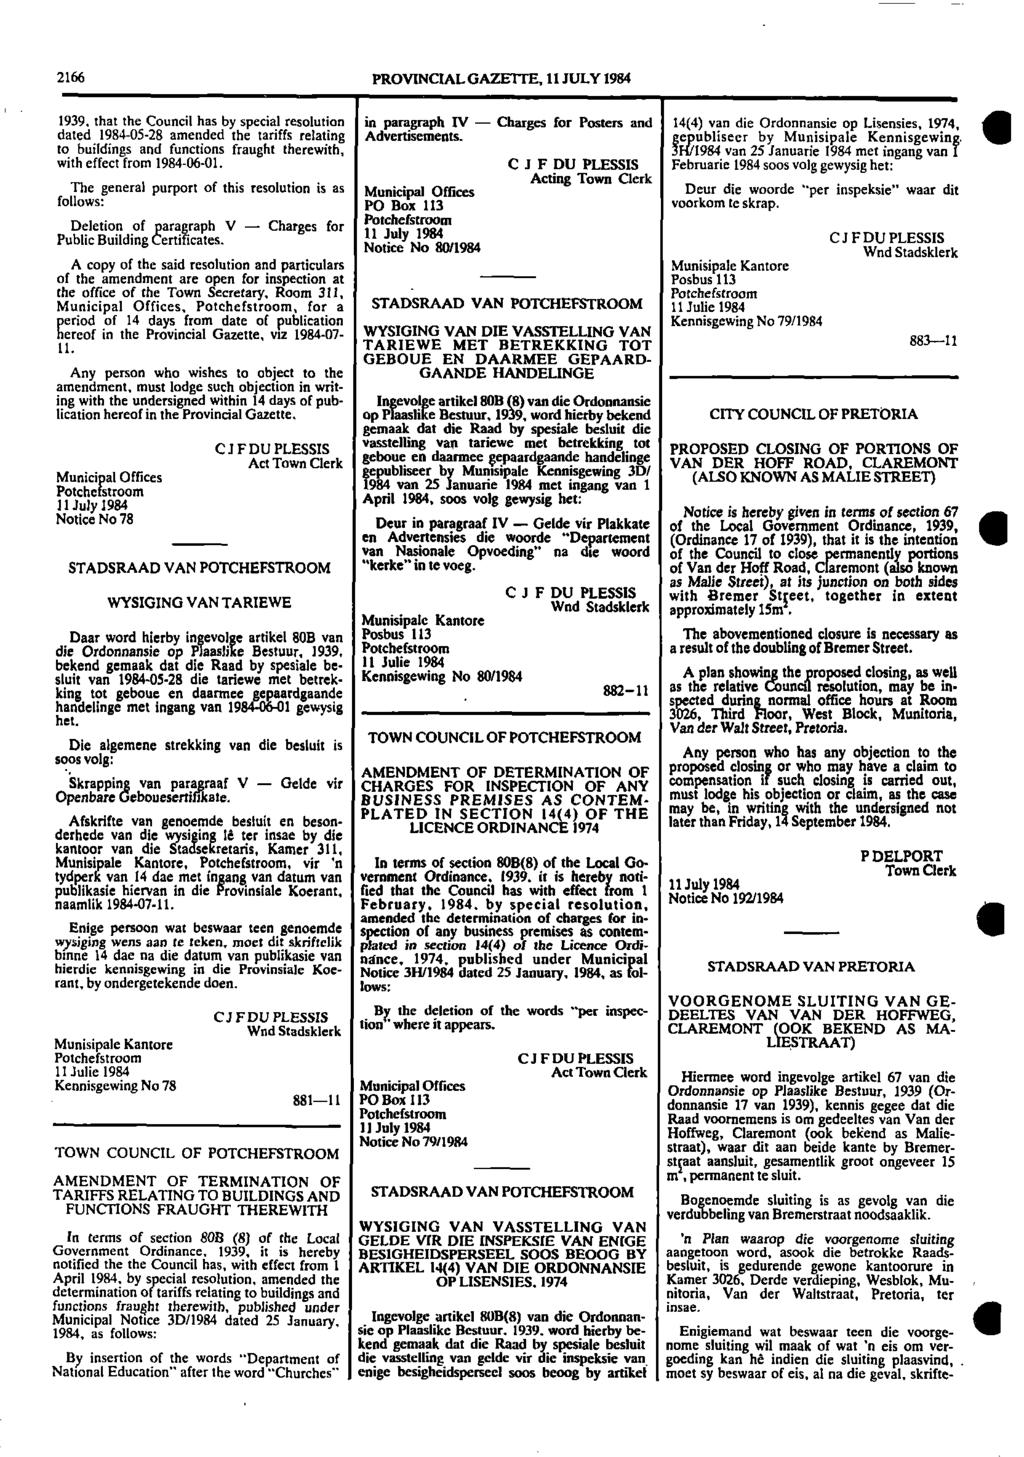 2166 PROVINCIAL GAZETTE 11 JULY 1984 1939 that the Council has by special resolution in paragraph IV Charges for Posters and 14(4) van die Ordonnansie op Lisensies 1974 dated 19840528 amended the